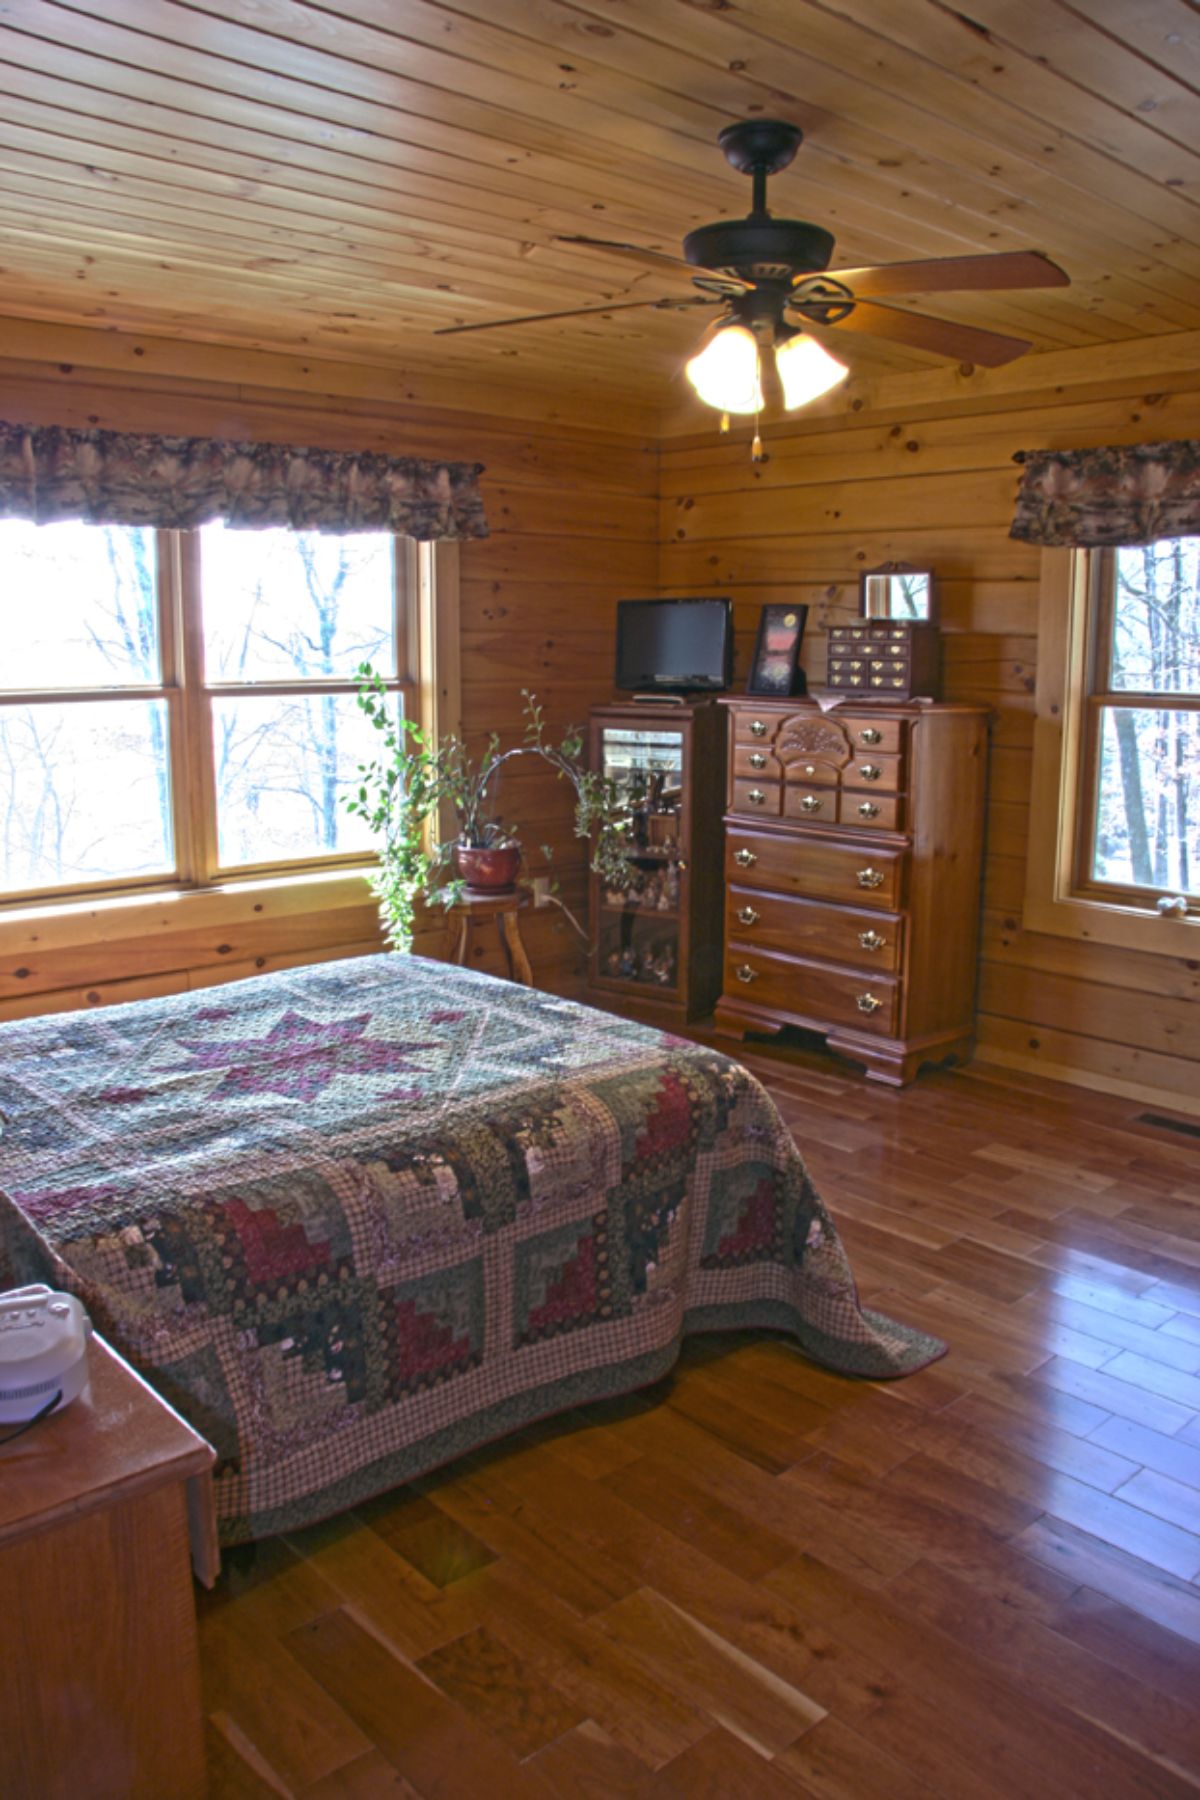 quilt on bed in log cabin bedroom with windows on left